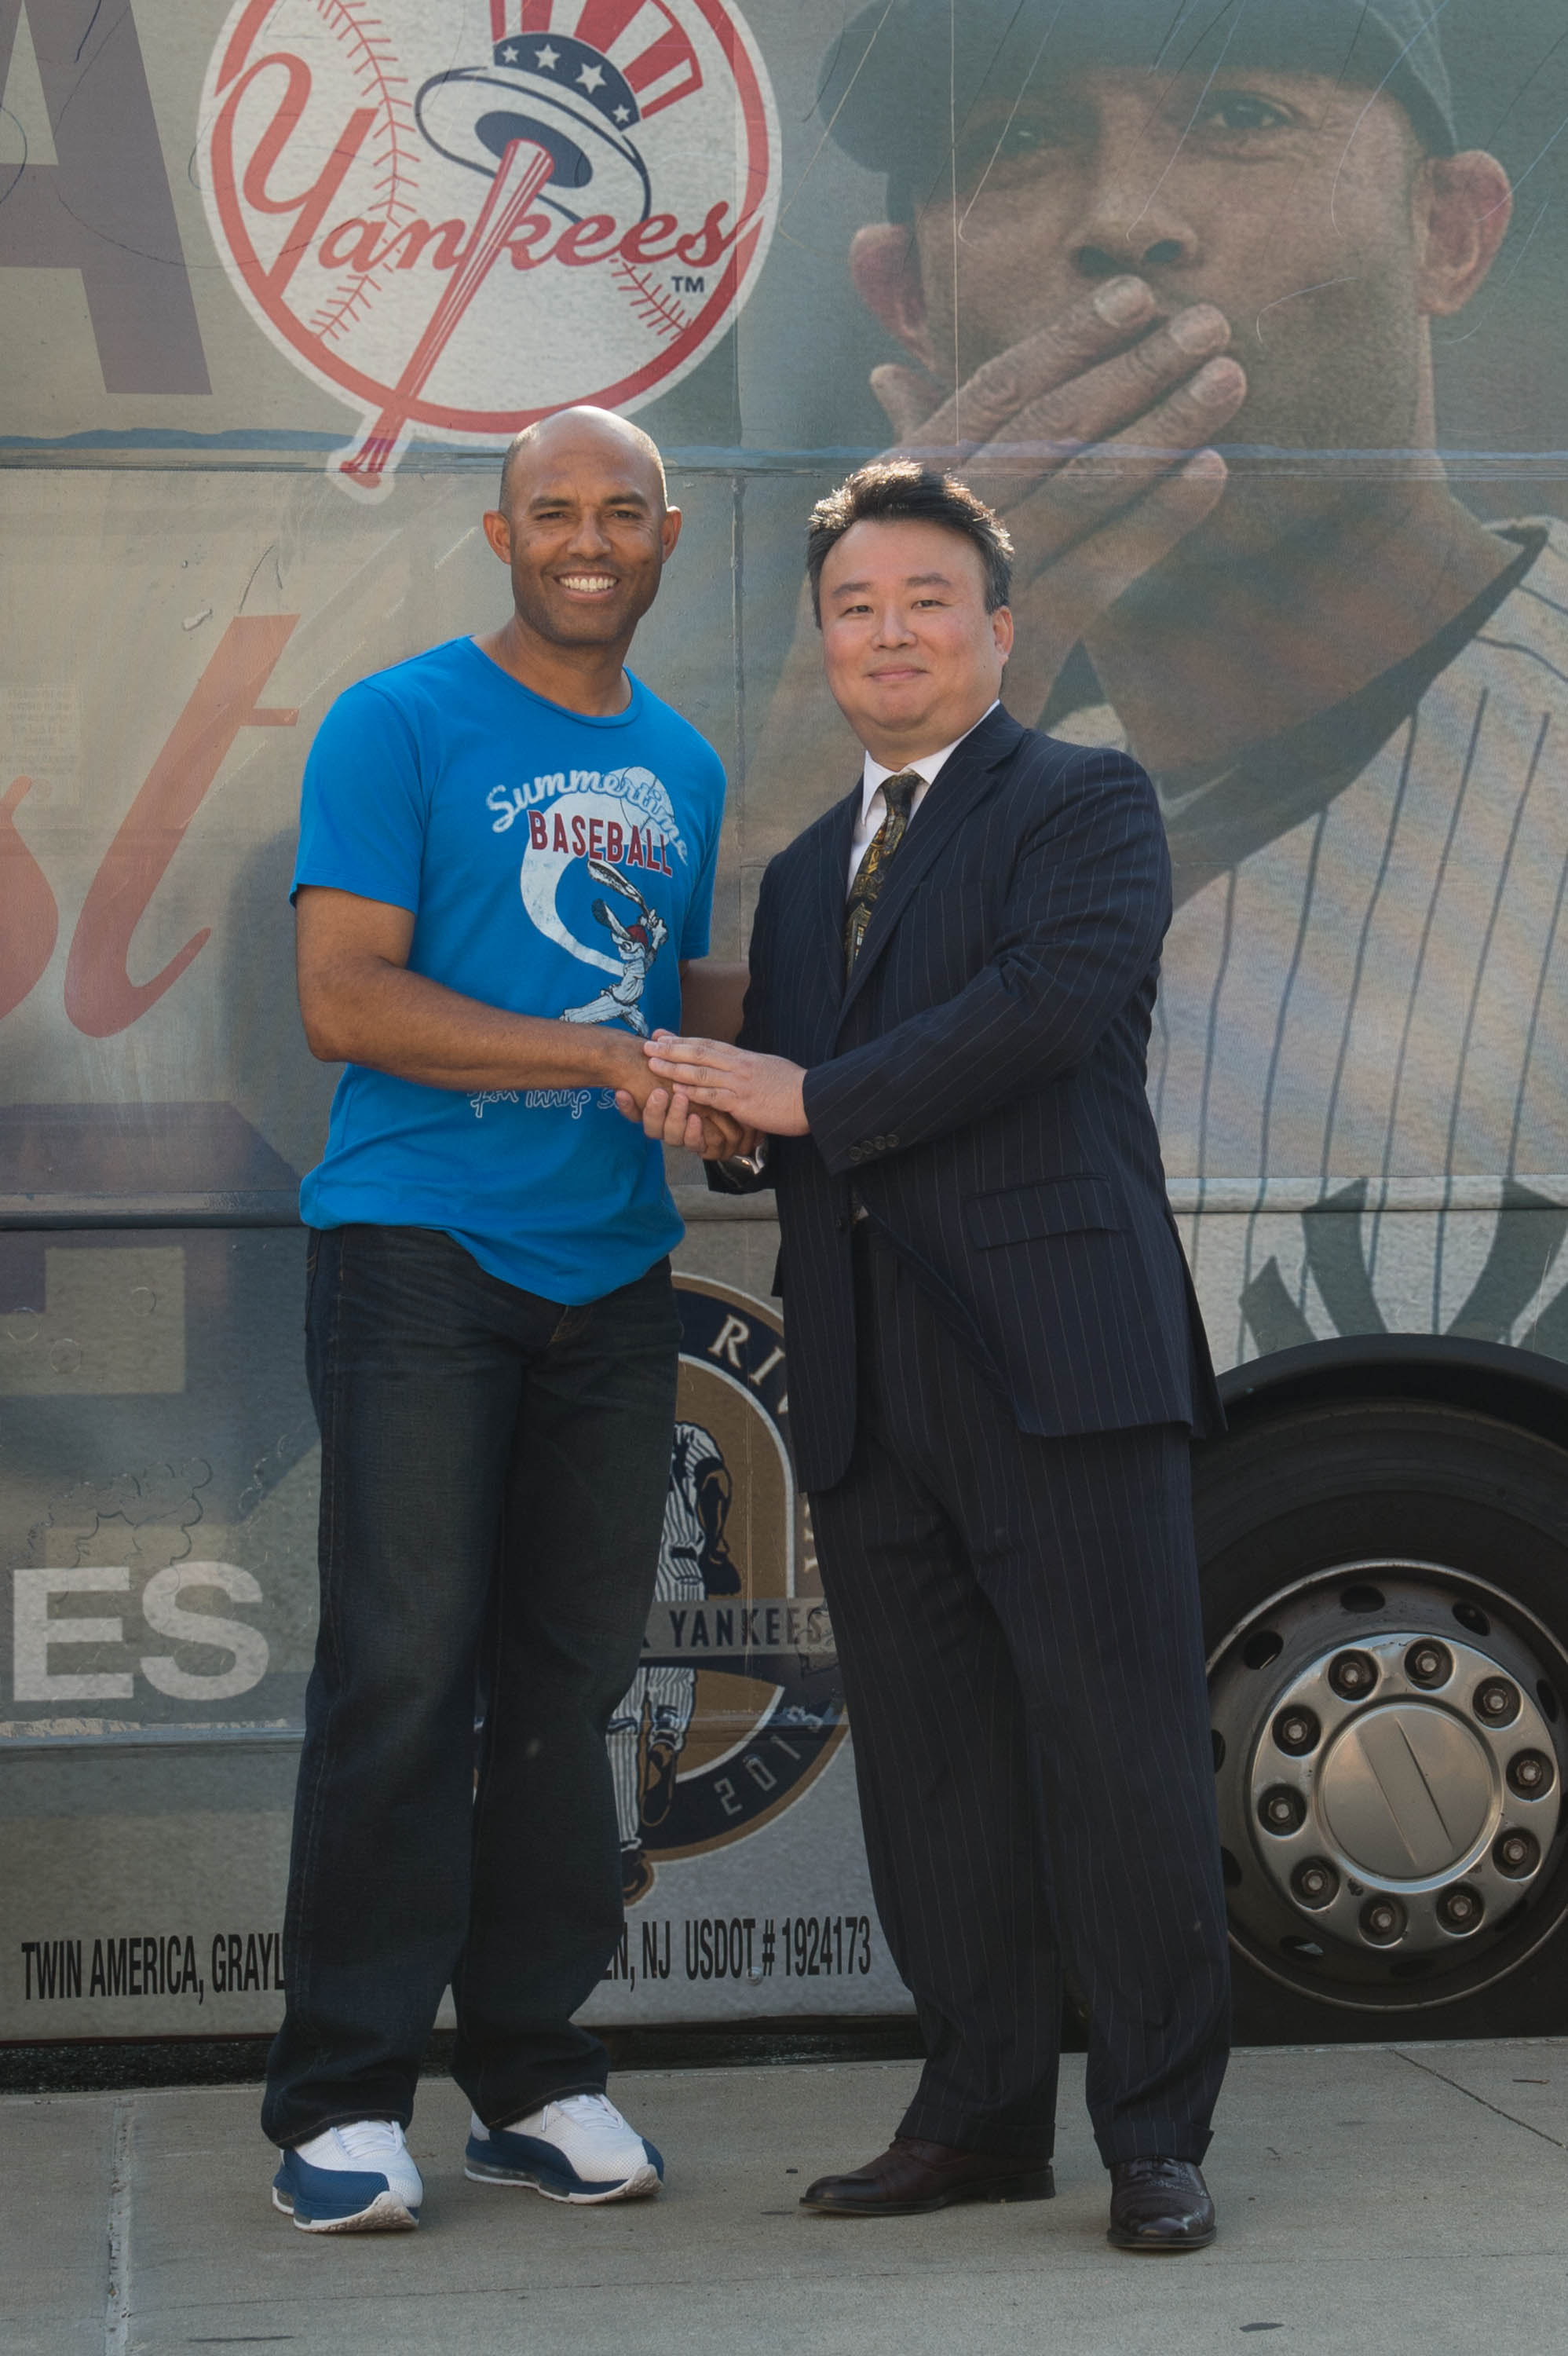 David W. Chien poses with Ride of Fame Honoree Mariano Rivera (September 20th, 2013).